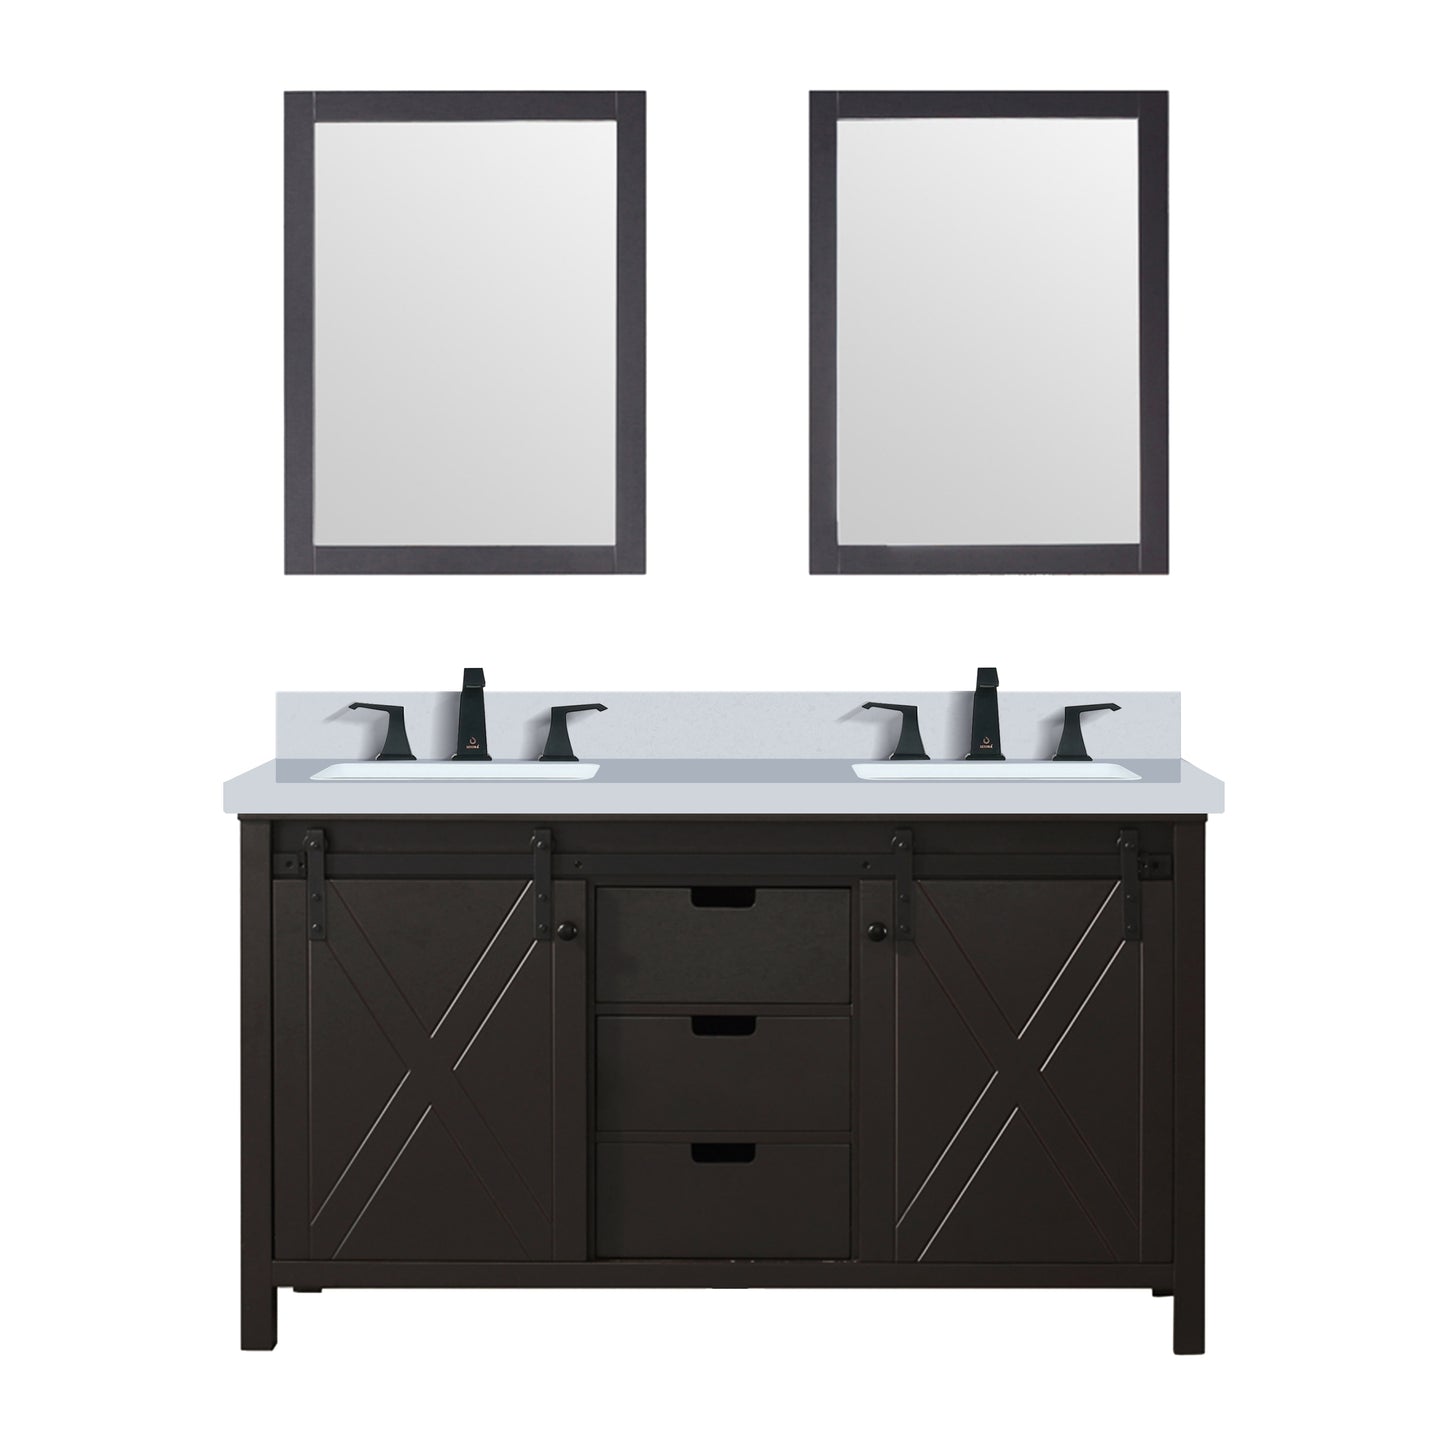 Lexora Collection Marsyas 60 inch Double Bath Vanity, Cultured Marble Countertop, Faucet Set and 24 inch Mirrors - Luxe Bathroom Vanities